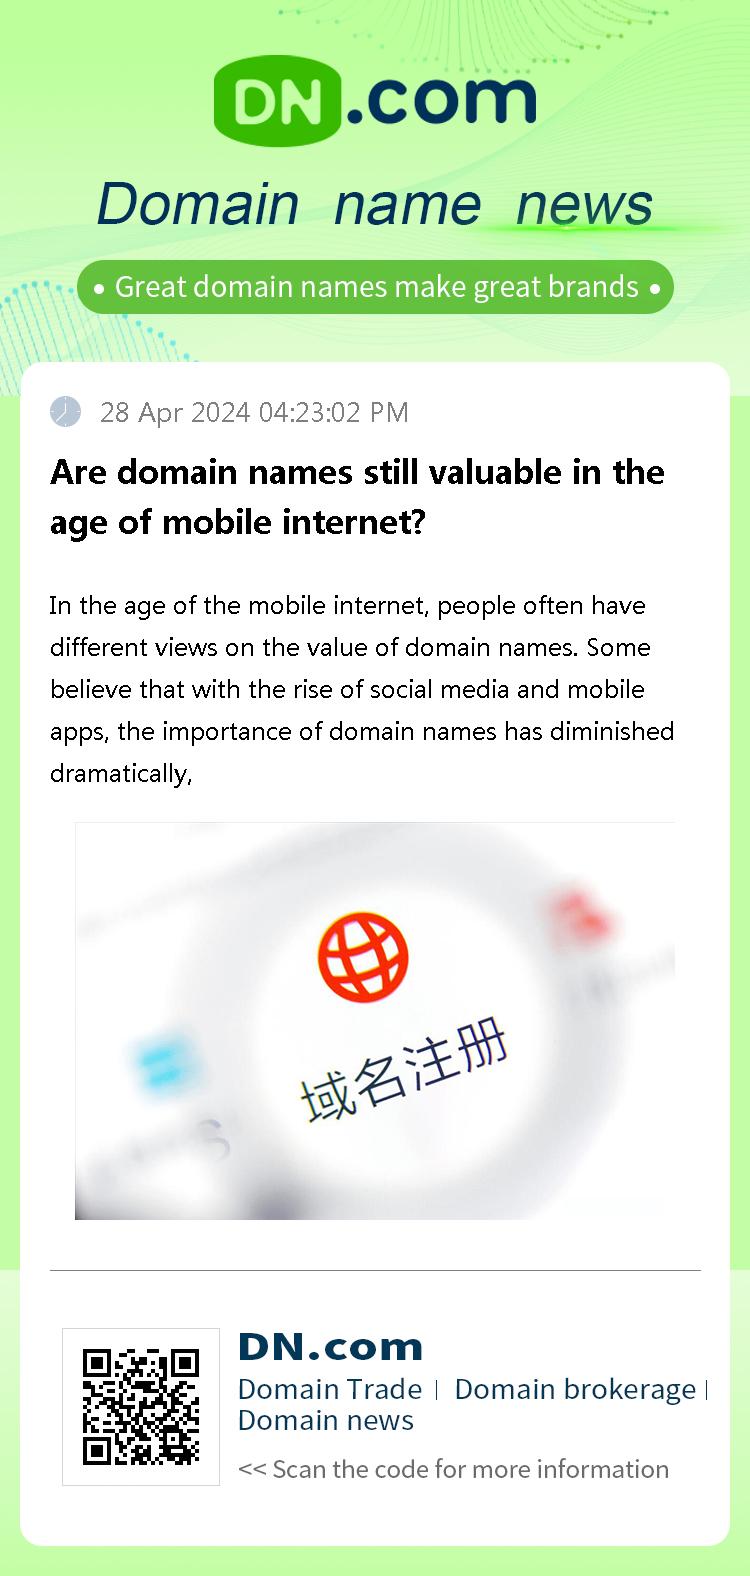 Are domain names still valuable in the age of mobile internet?